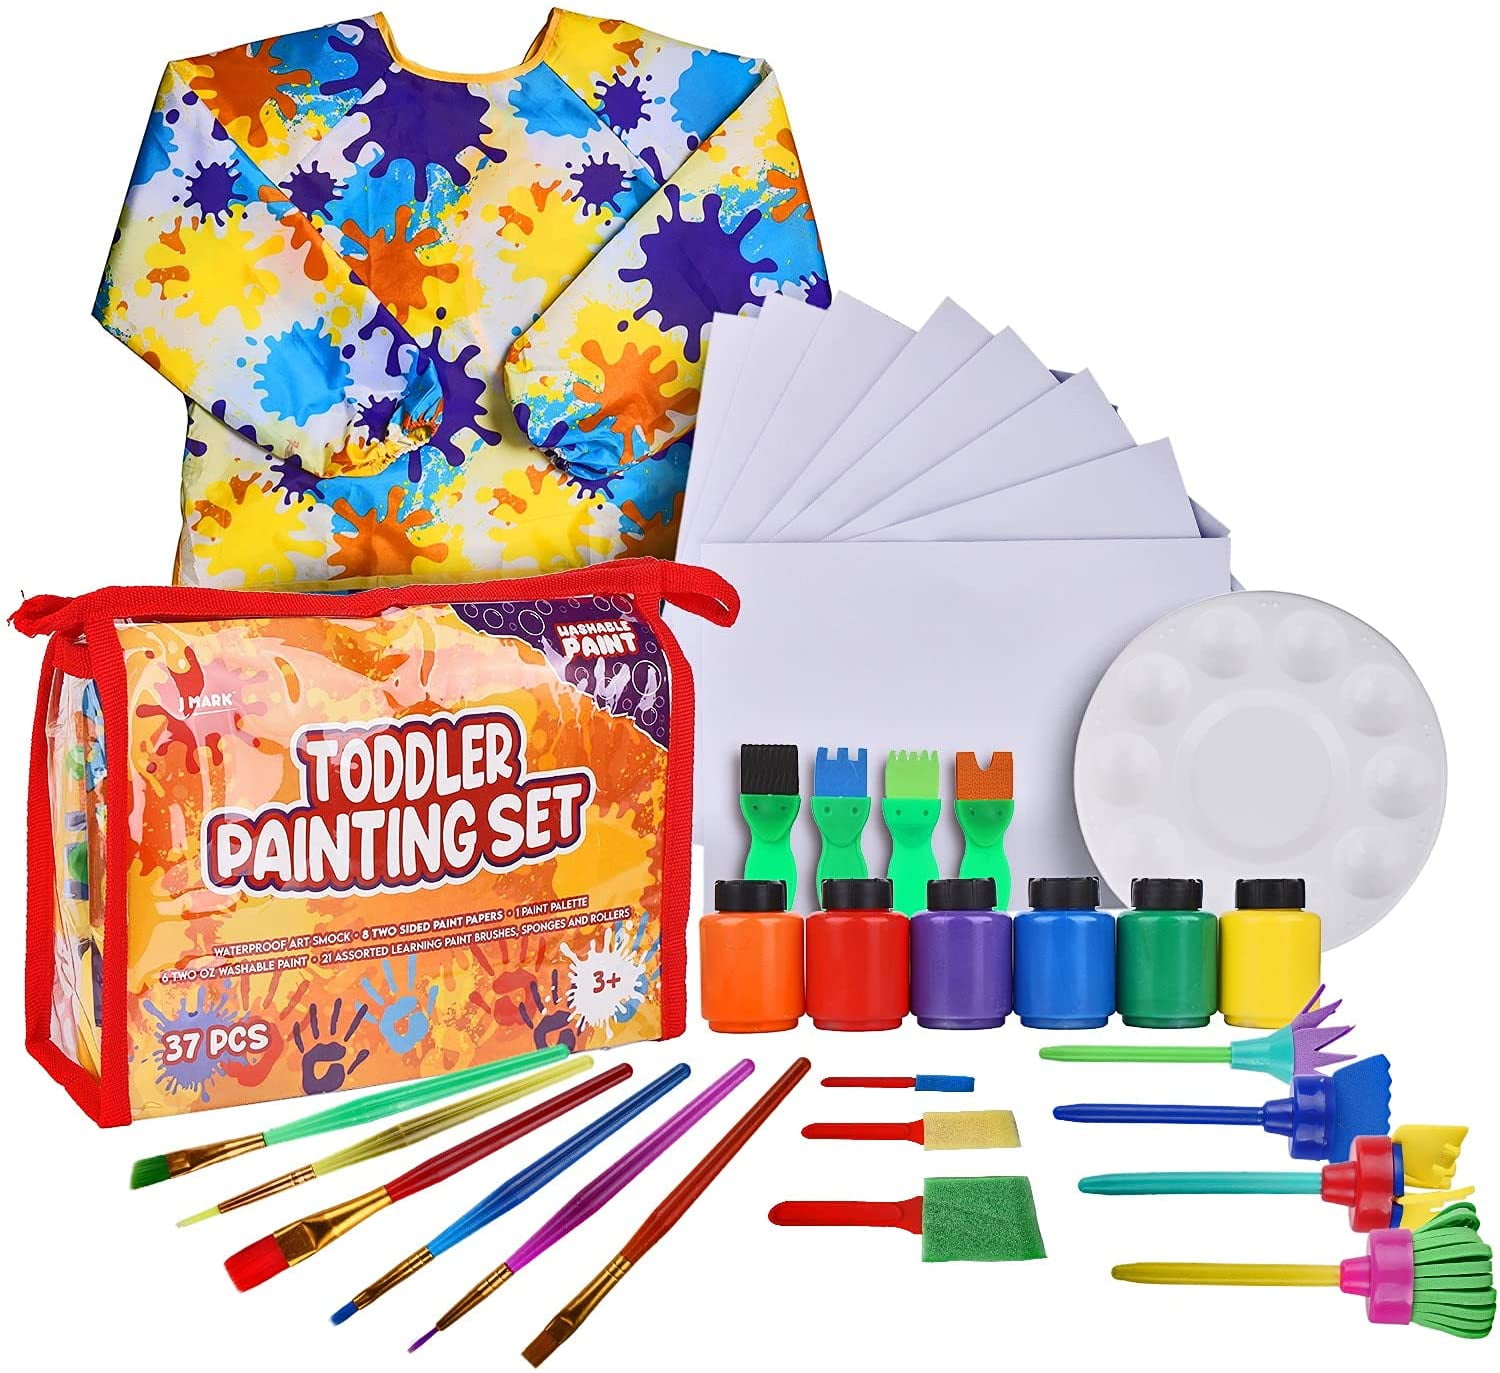 22 Pcs Toddler Painting Set Include 10 Toddler Paint Cups with Lids 10 Pcs  Toddler Paint Brushes and 2 Pcs Paint Palette Prop Paint Tray Art Paint  Supplies for …